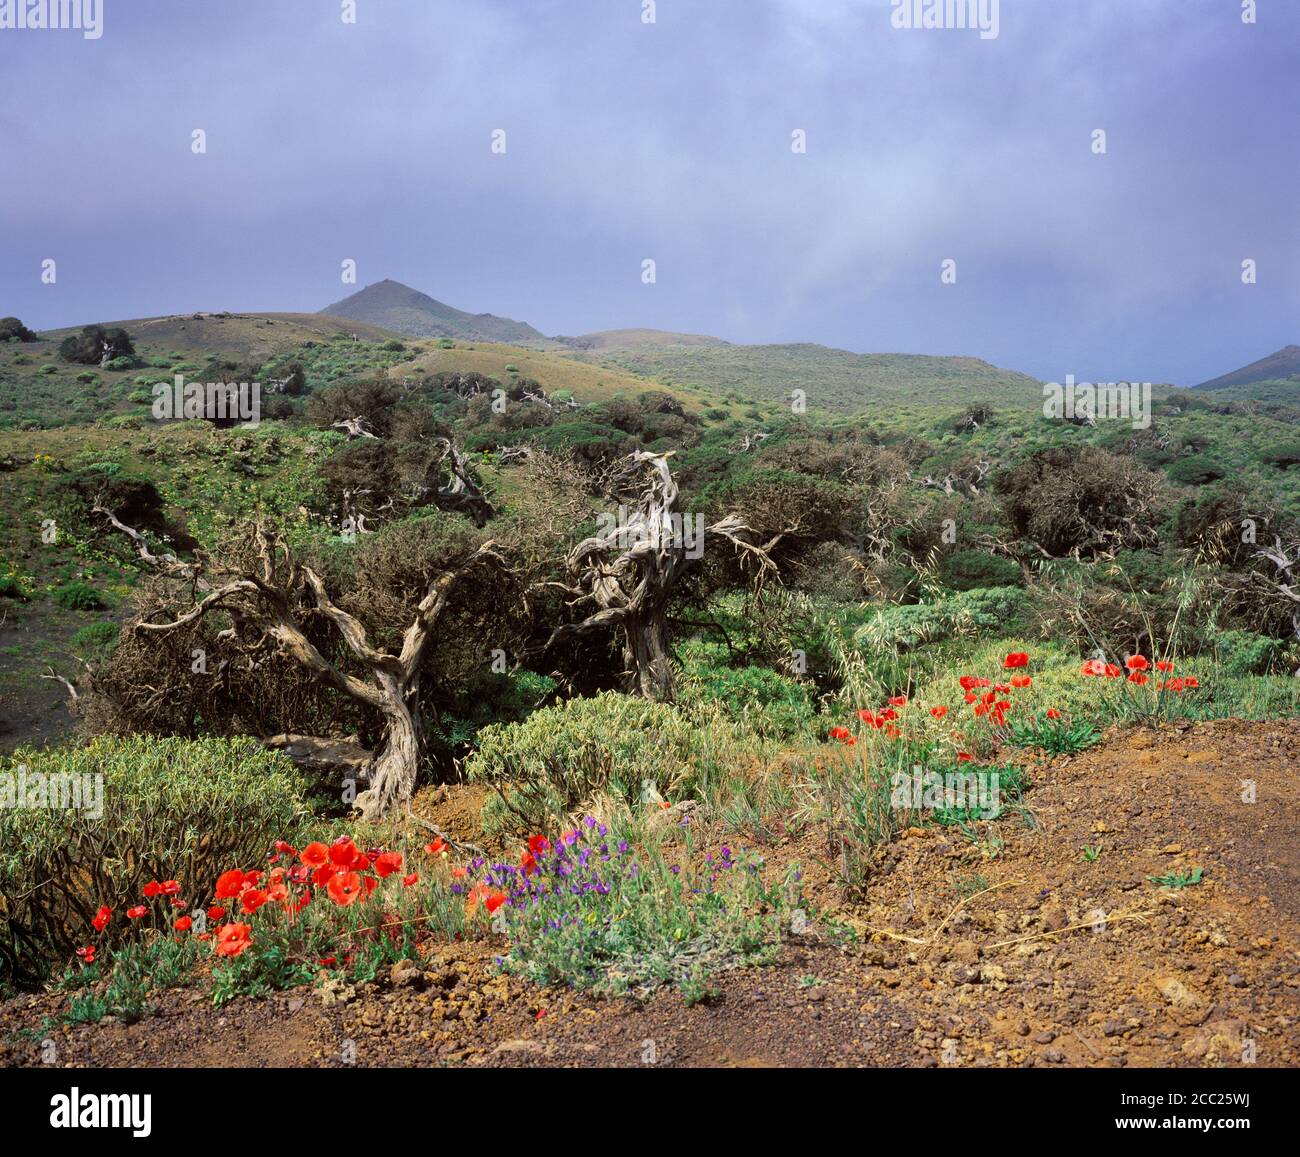 Spain, Canary Islands, El Hierro, View of juniper forest Stock Photo